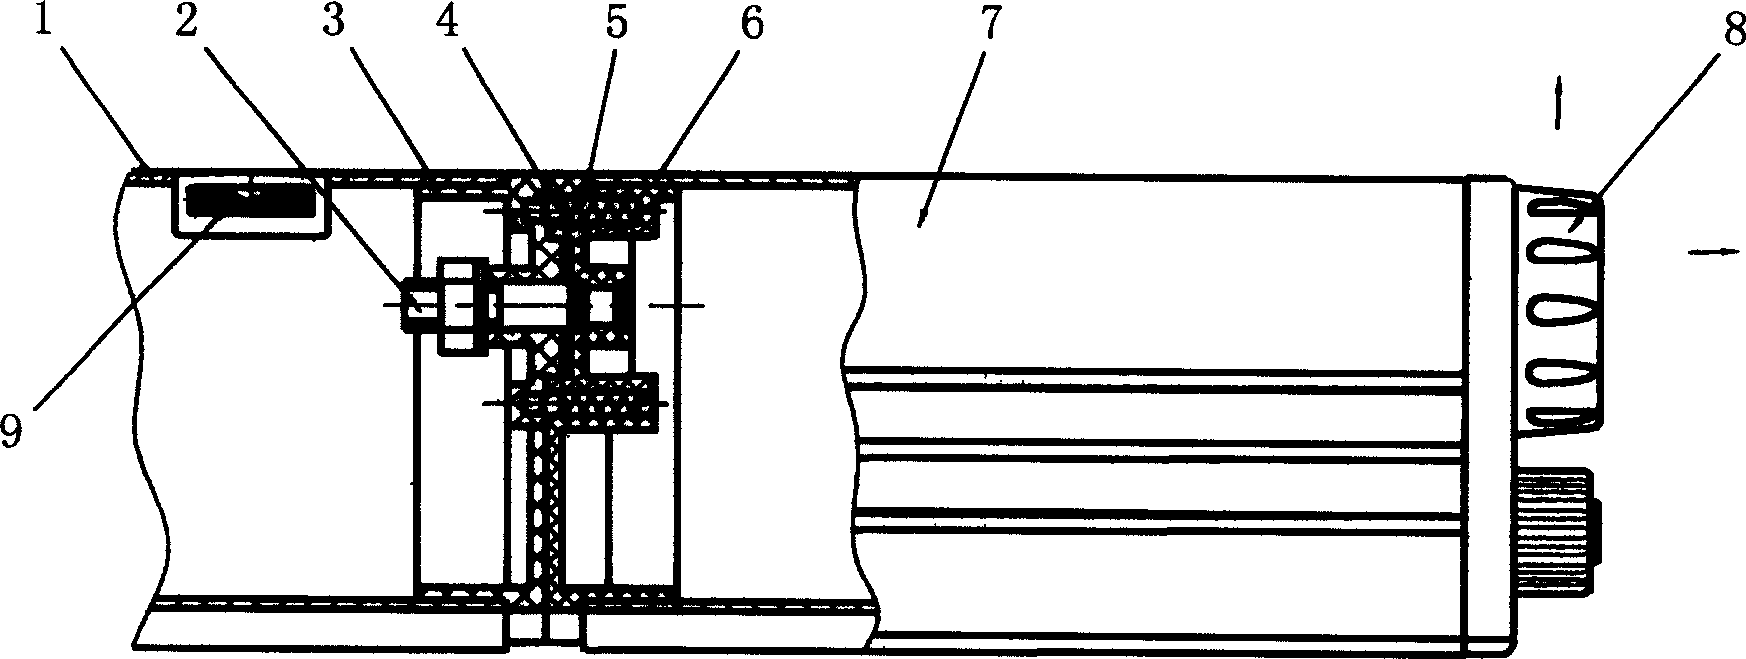 Laser leveling rod with an angle conversion mechanism